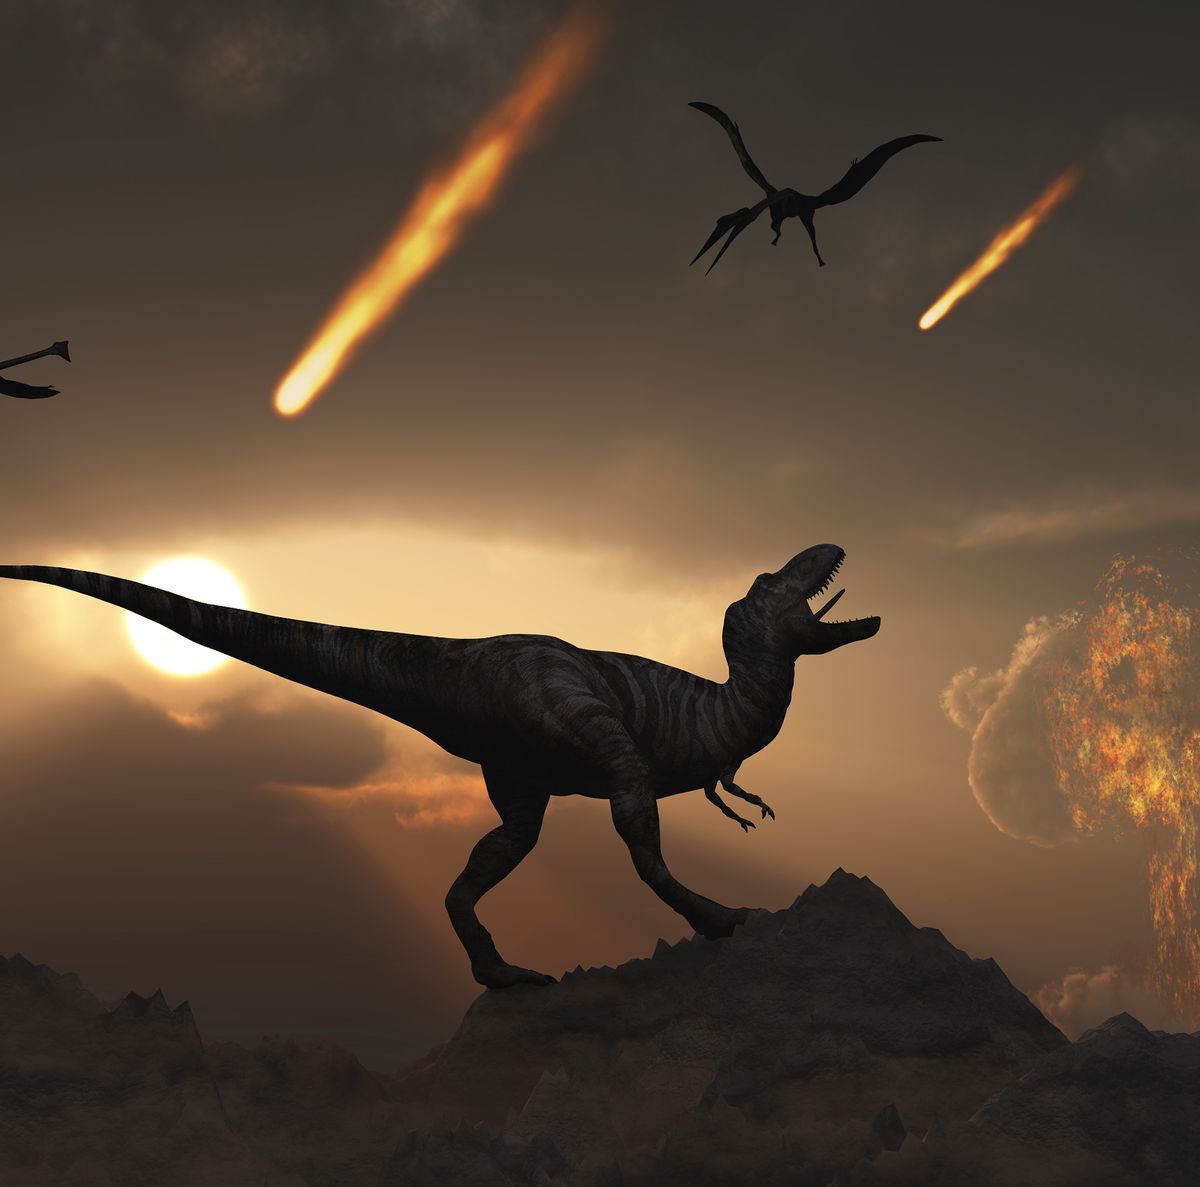 A Newfound Tiny-Armed, Large-Headed Dino Reminds Us of T. Rex